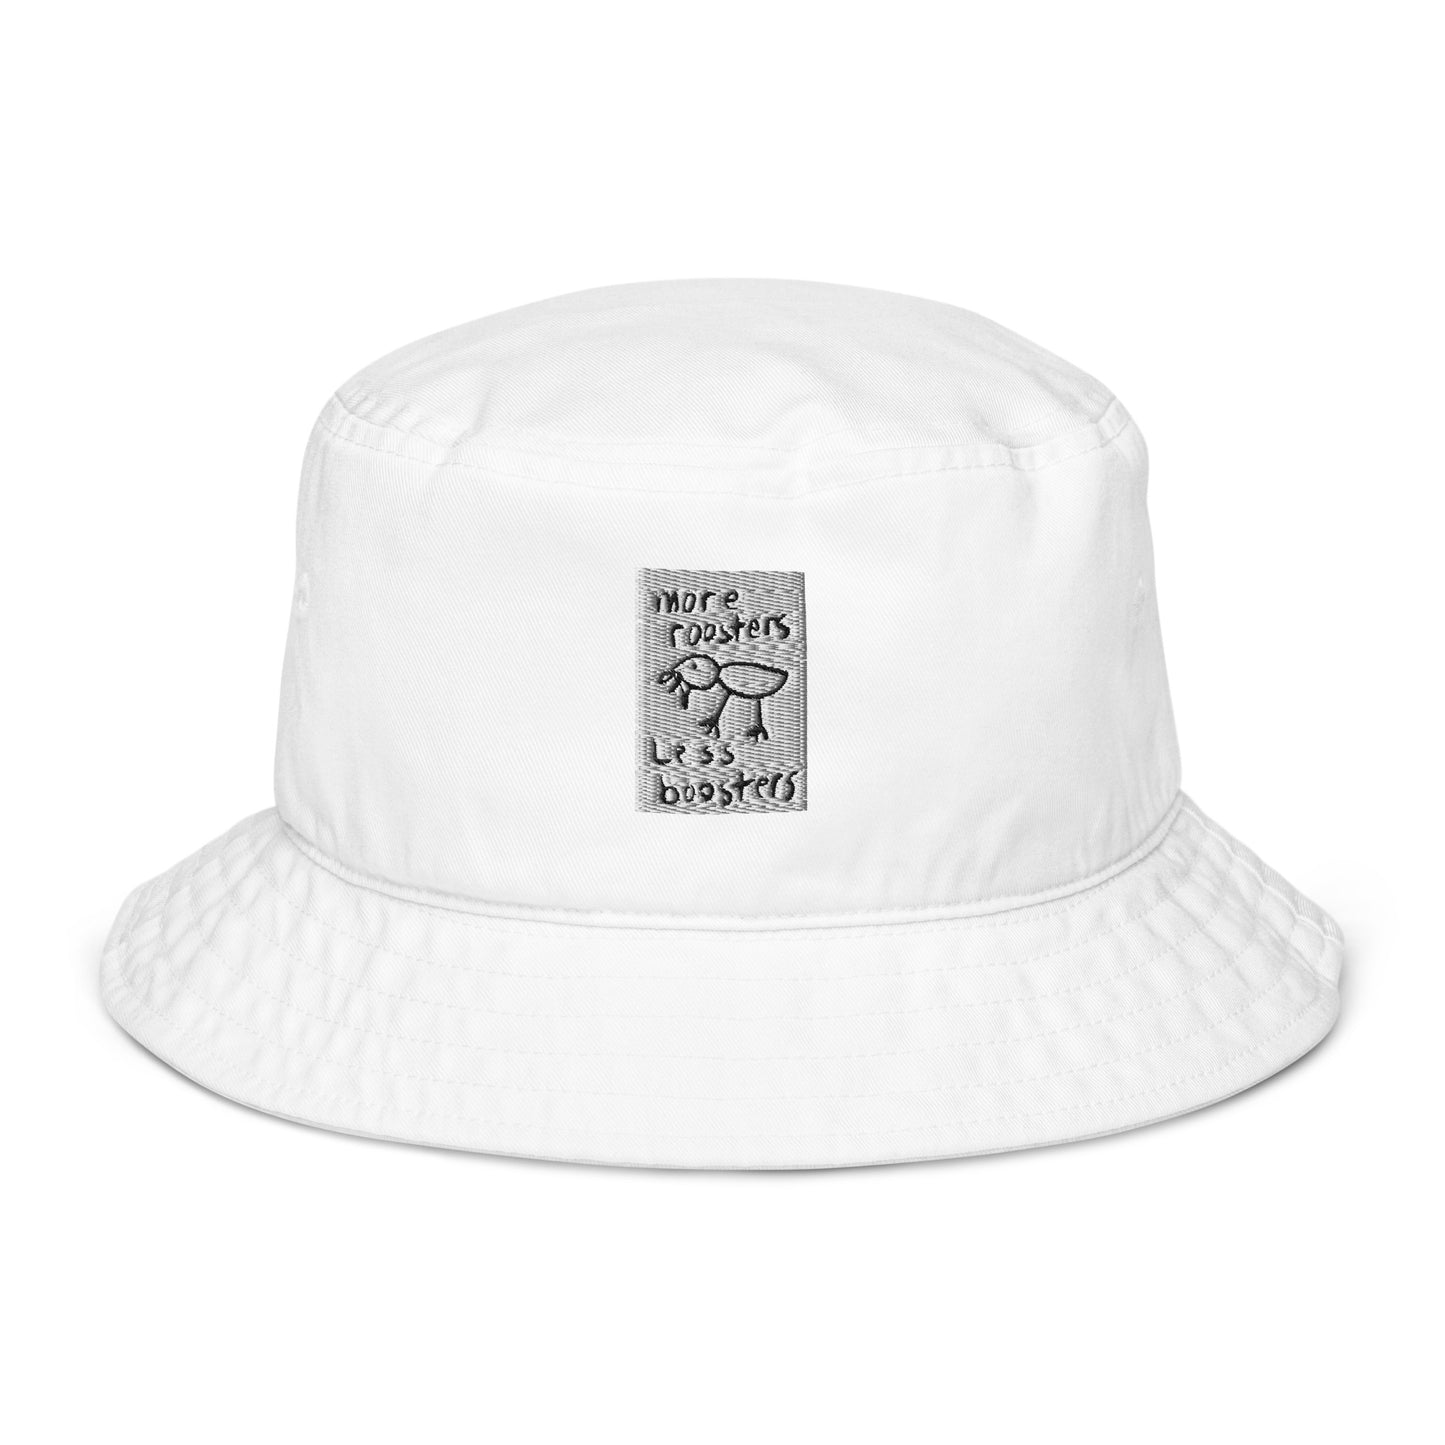 More roosters Organic bucket hat